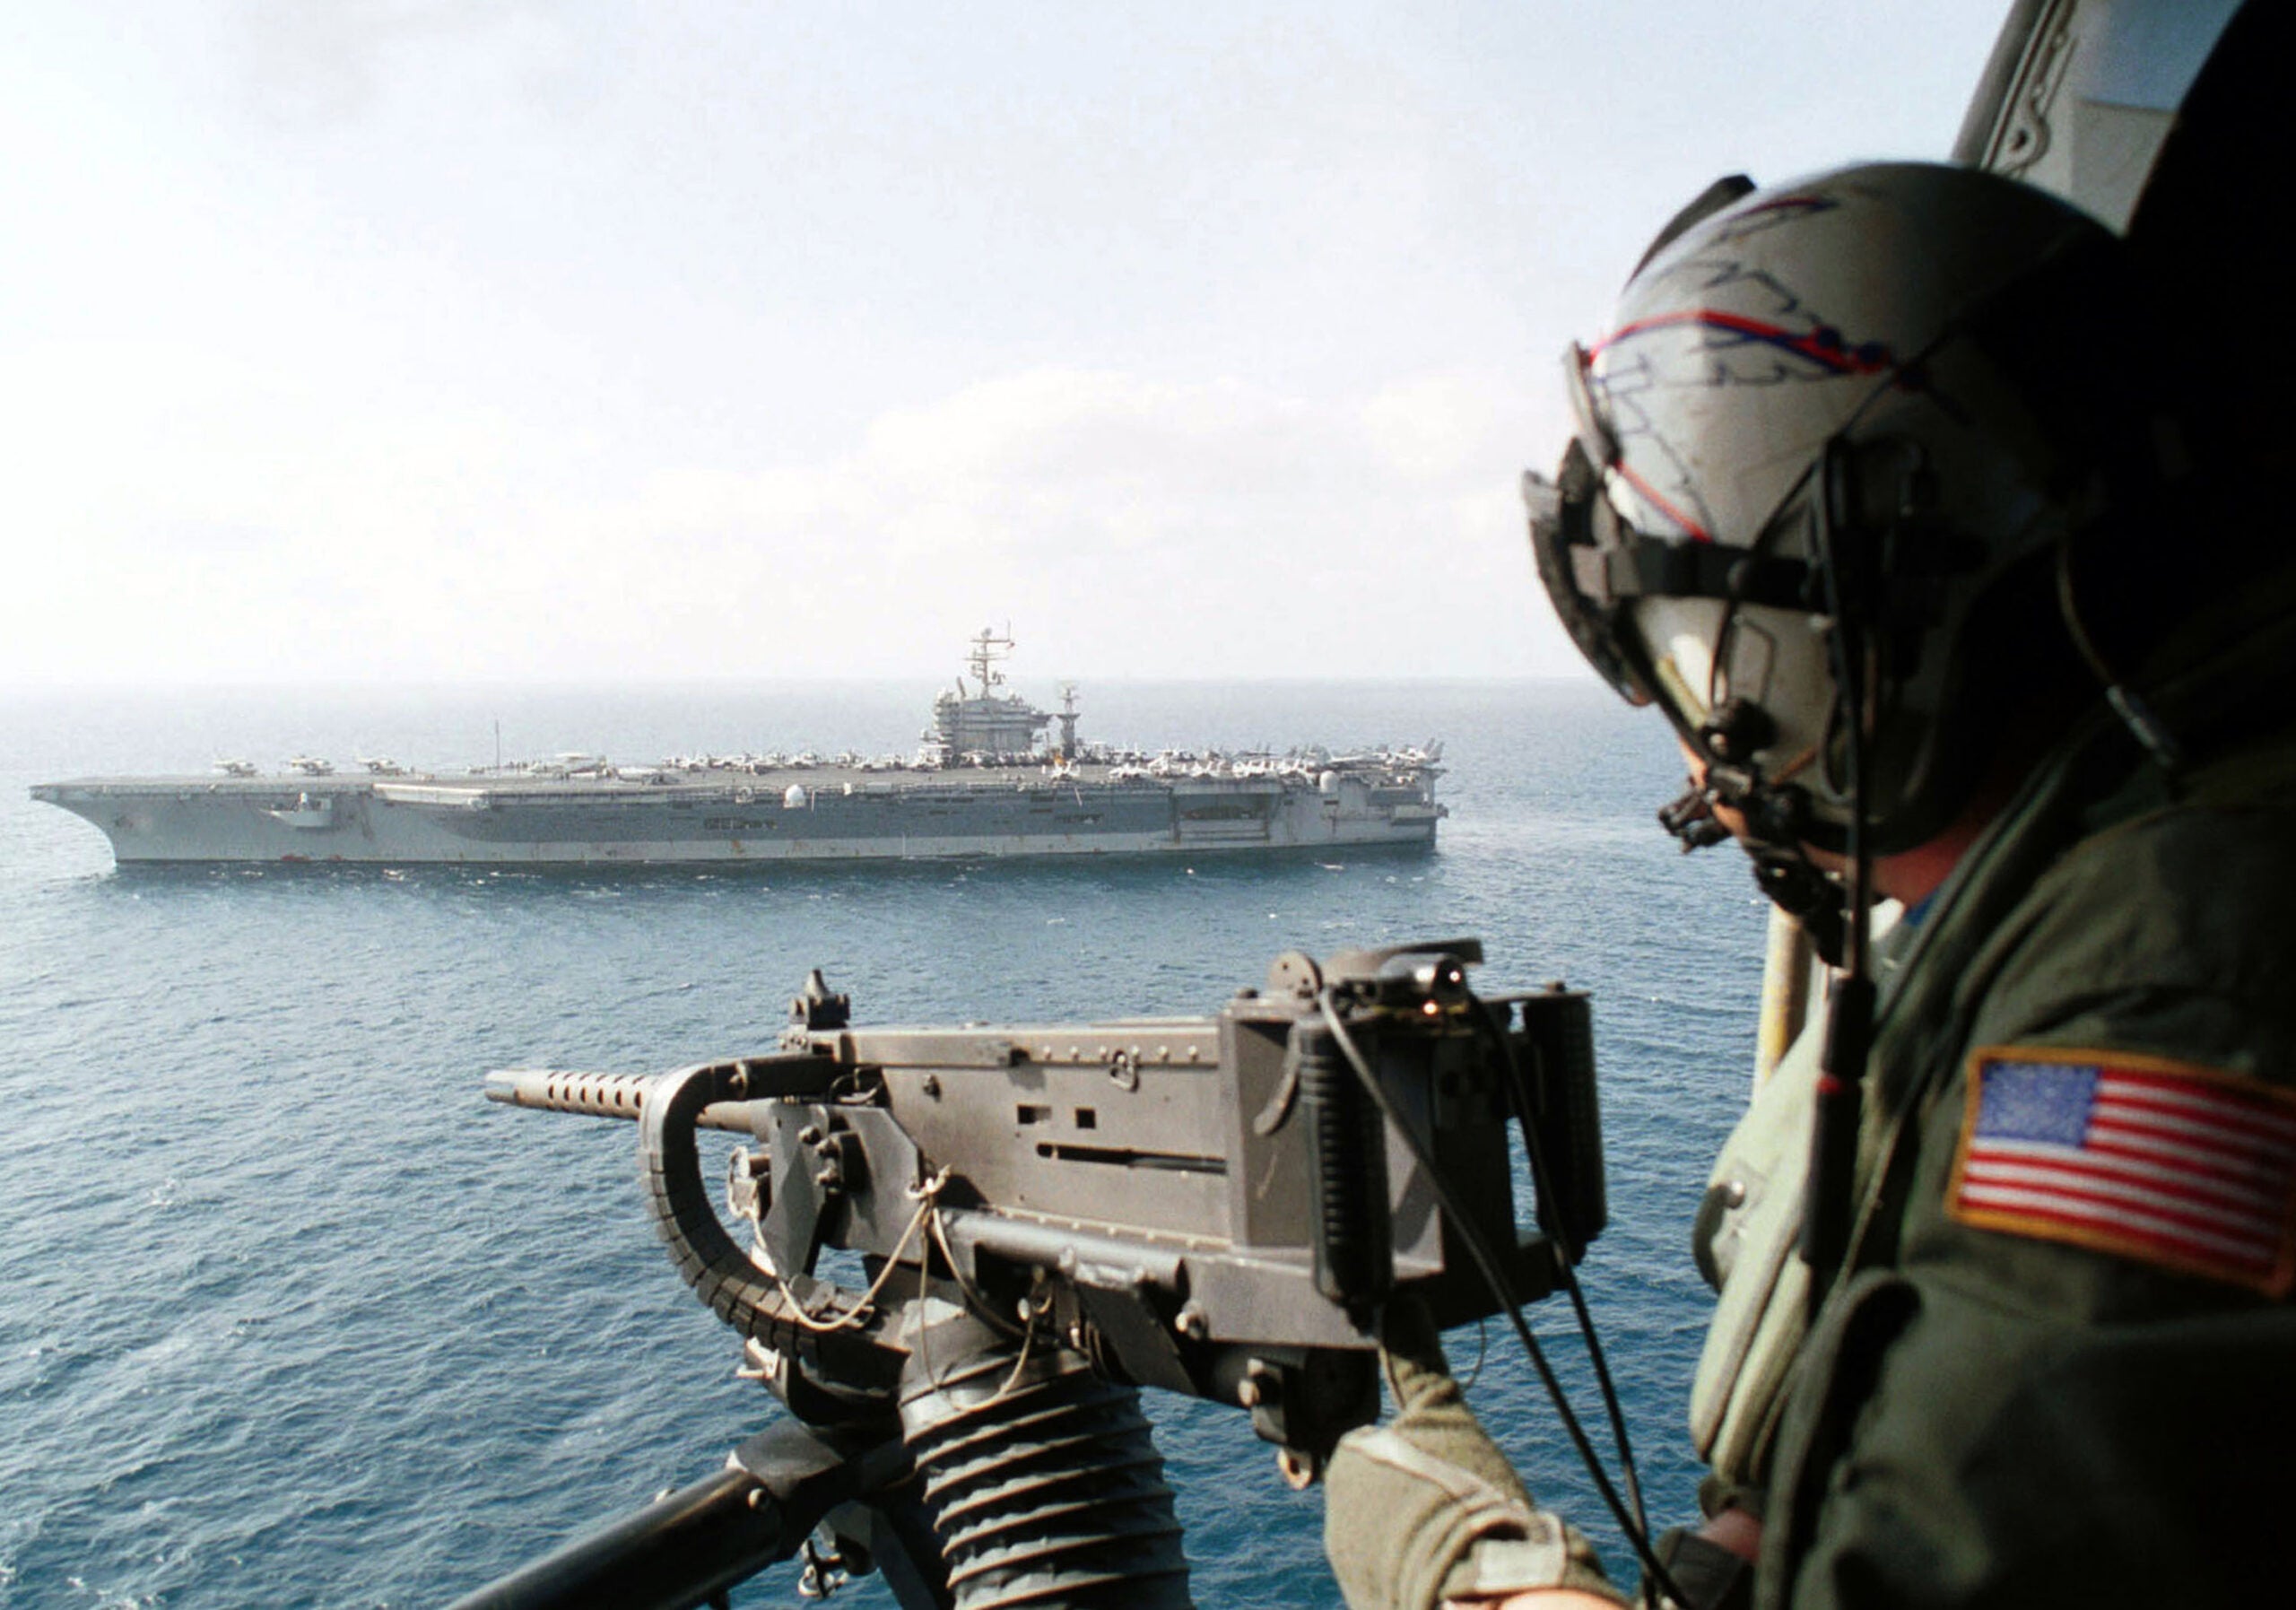 395173 01: A Chief Aviation Warfare Systems Operator scans the horizon above USS Carl Vinson from behind his GAU-16 50 caliber machine gun aboard an SH-60H "Seahawk" helicopter September 24, 2001 at sea in Southwest Asia. The USS Carl Vinson Battle Group is on a scheduled deployment. (Photo by Chief Photographer's Mate Daniel E. Smith/U.S. Navy/Getty Images)